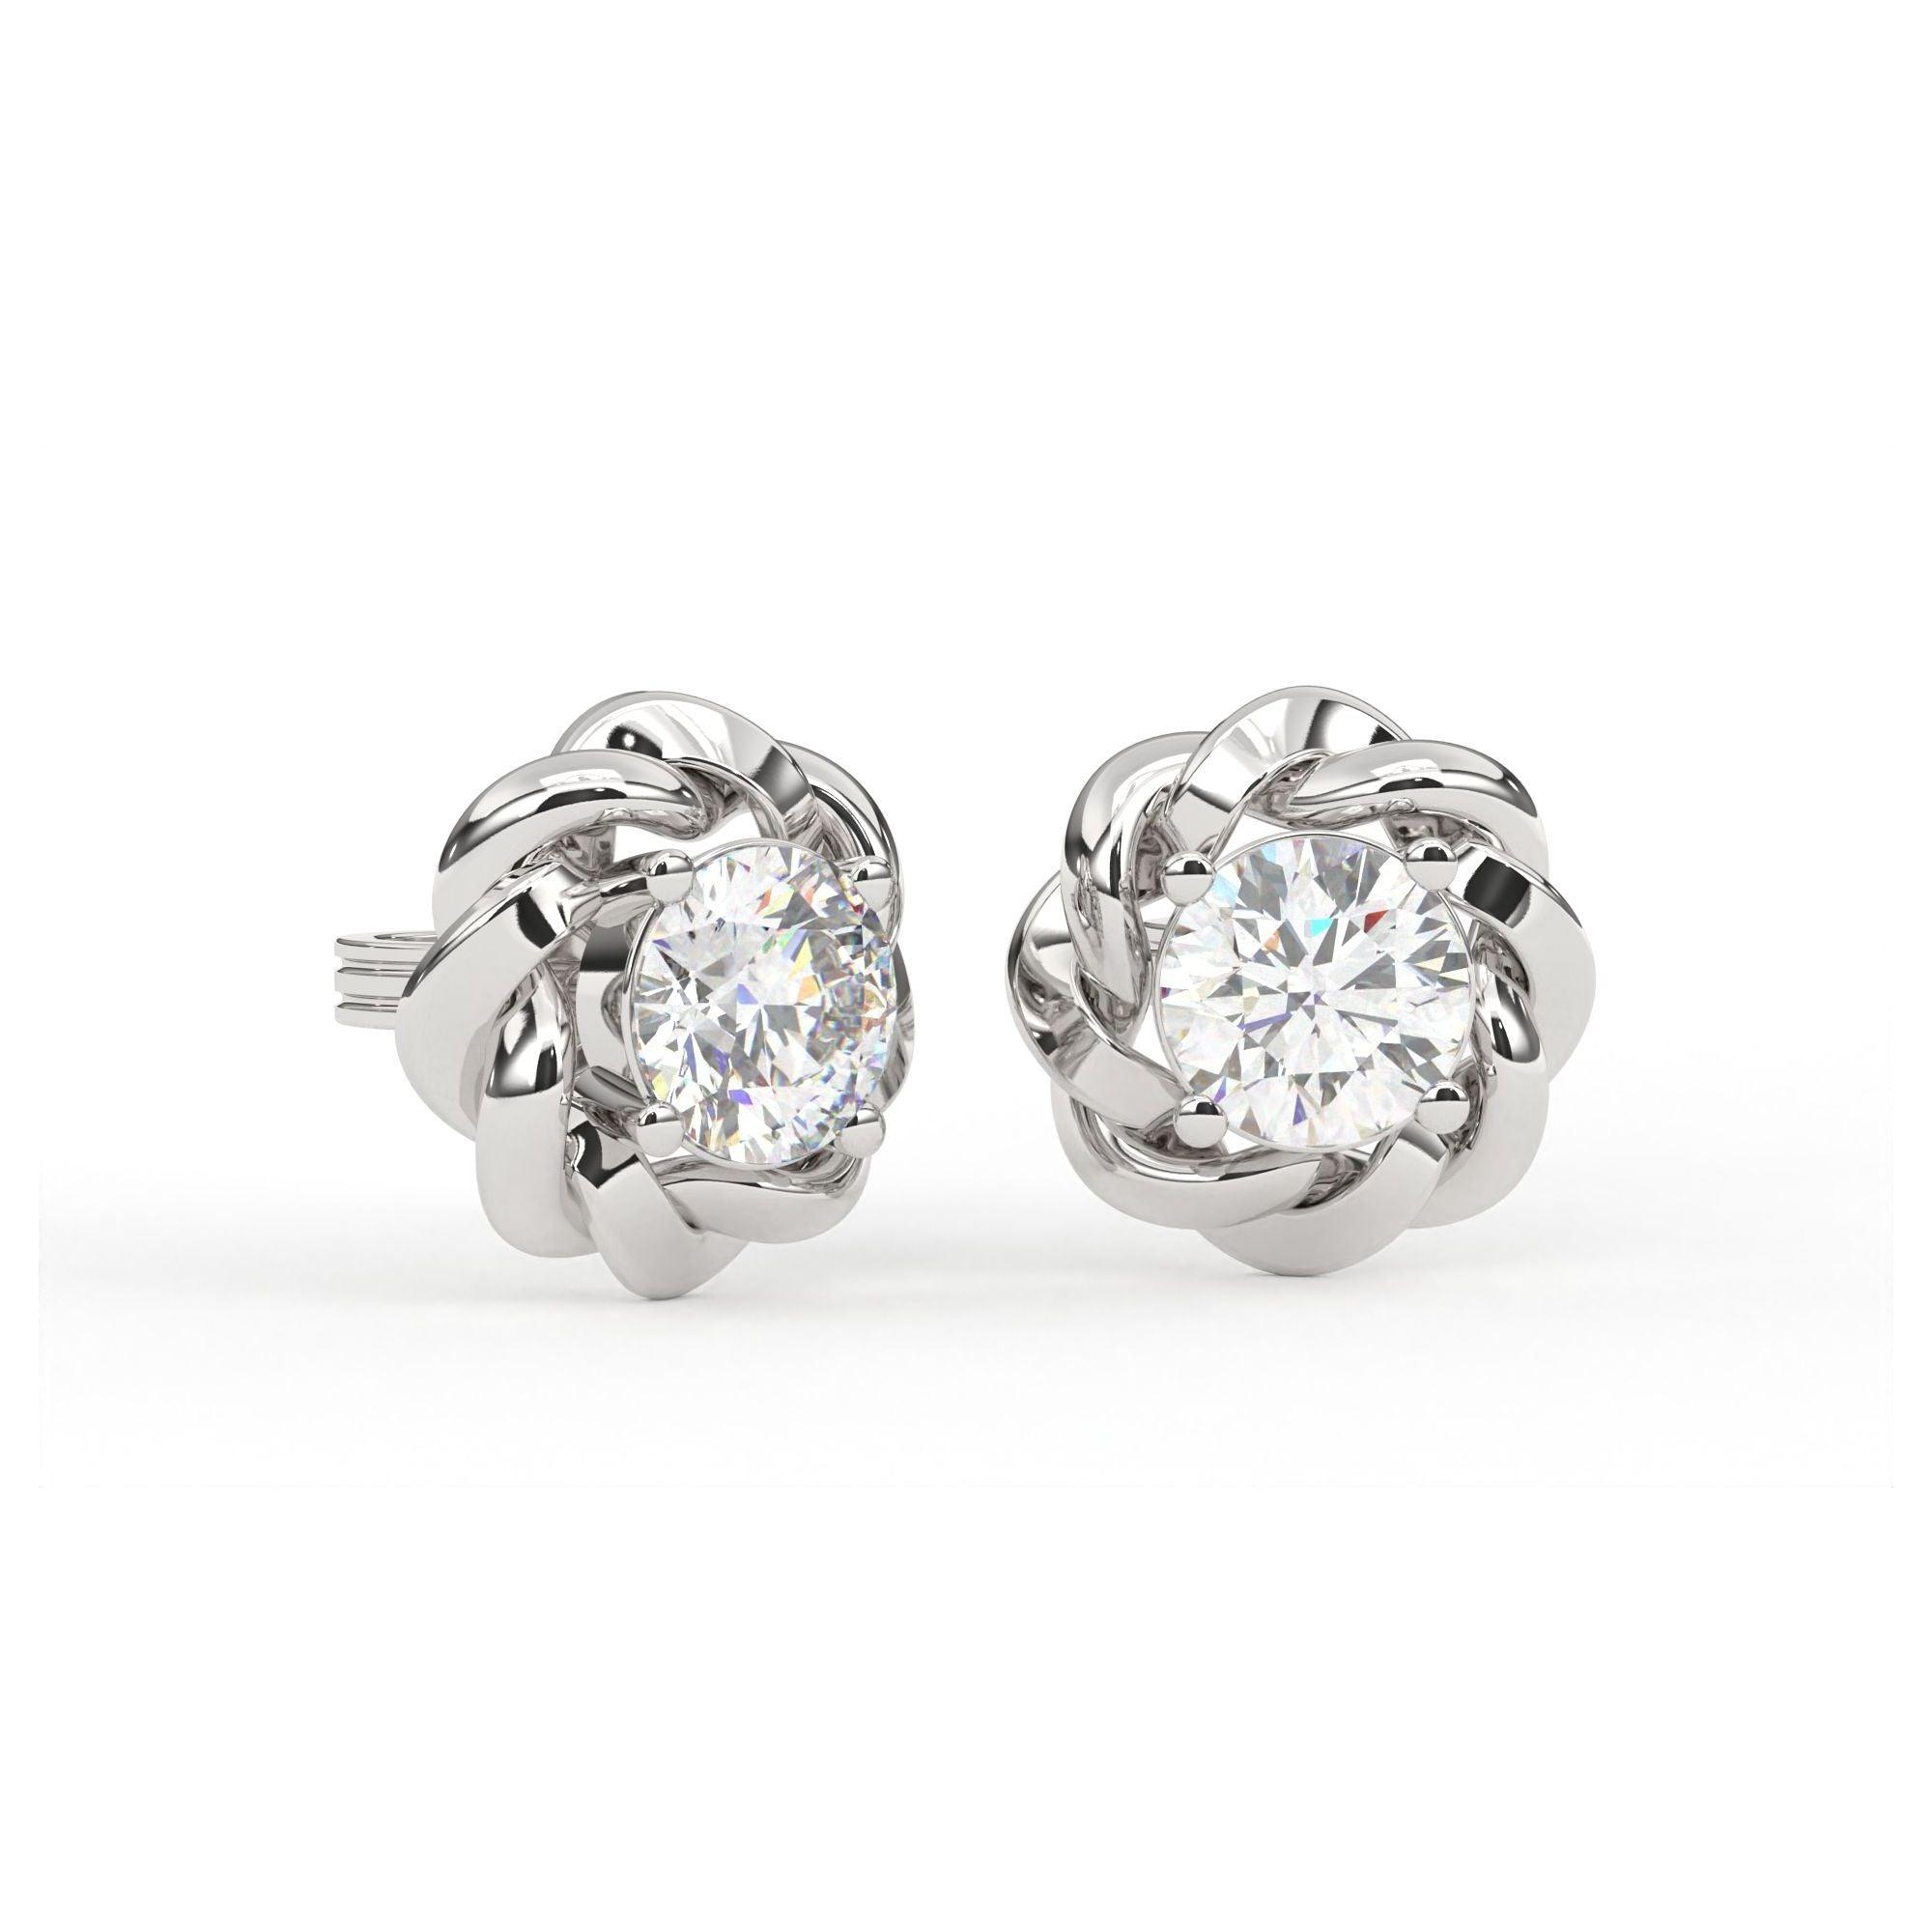 Auory 925 Sterling Silver Round Earring AUPE-308 - Auory